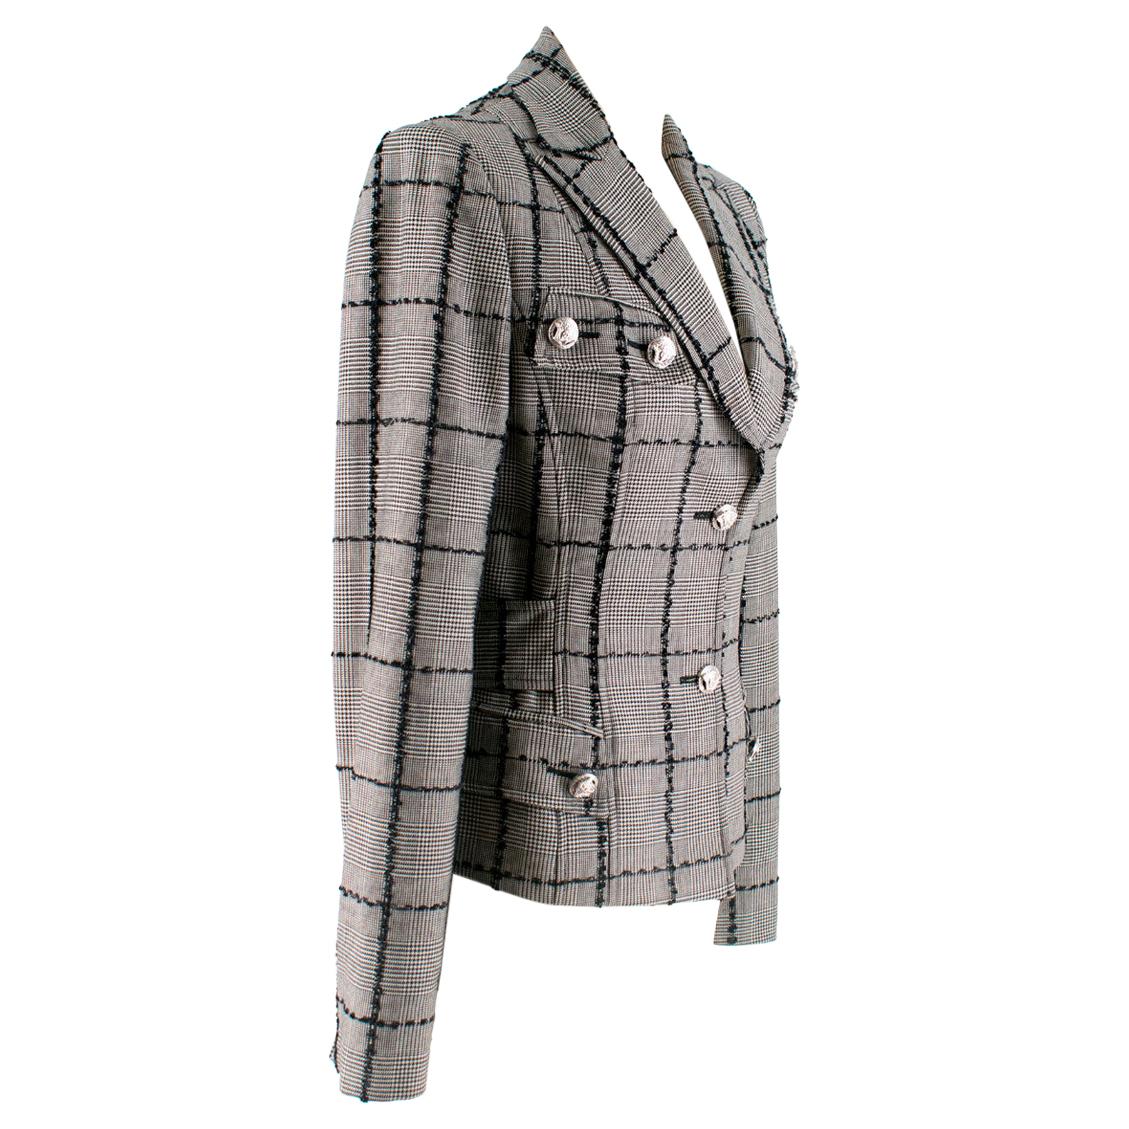 Versace Collection Houndstooth Tweed Trim Tailored Jacket XS 38 